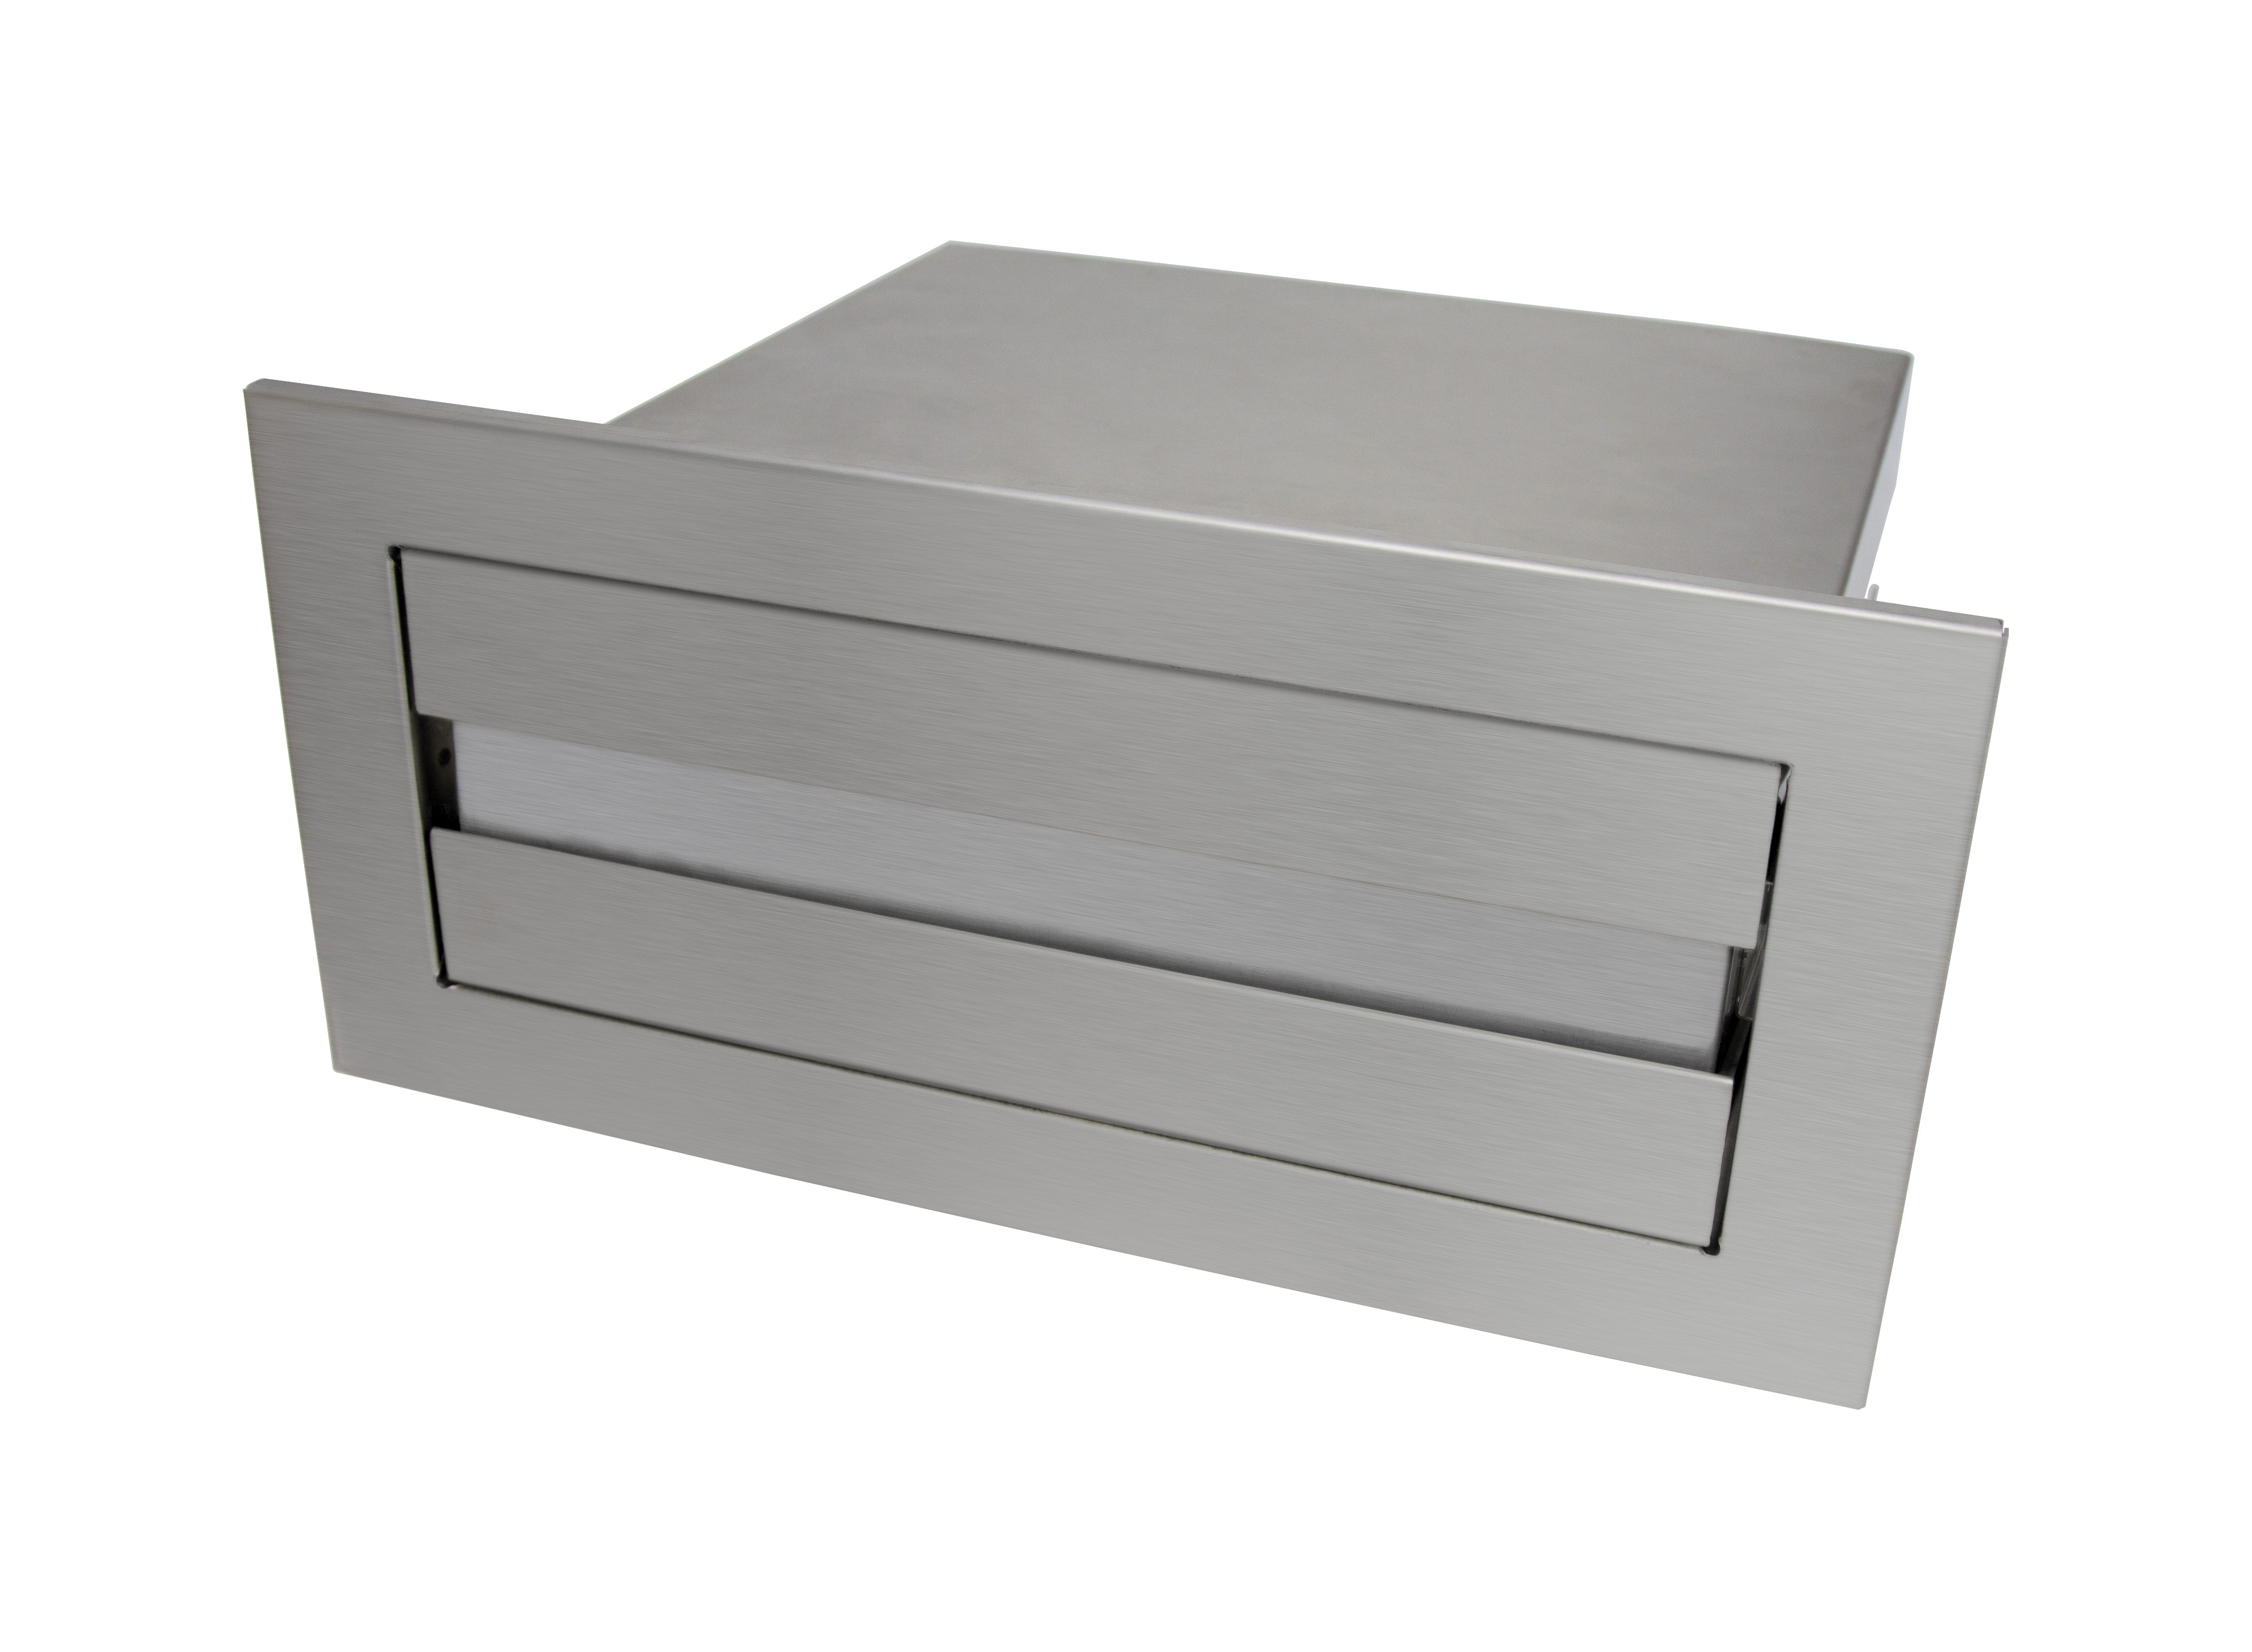 Counter Top Recessed Paper Towel Dispenser in Satin Stainless Steel